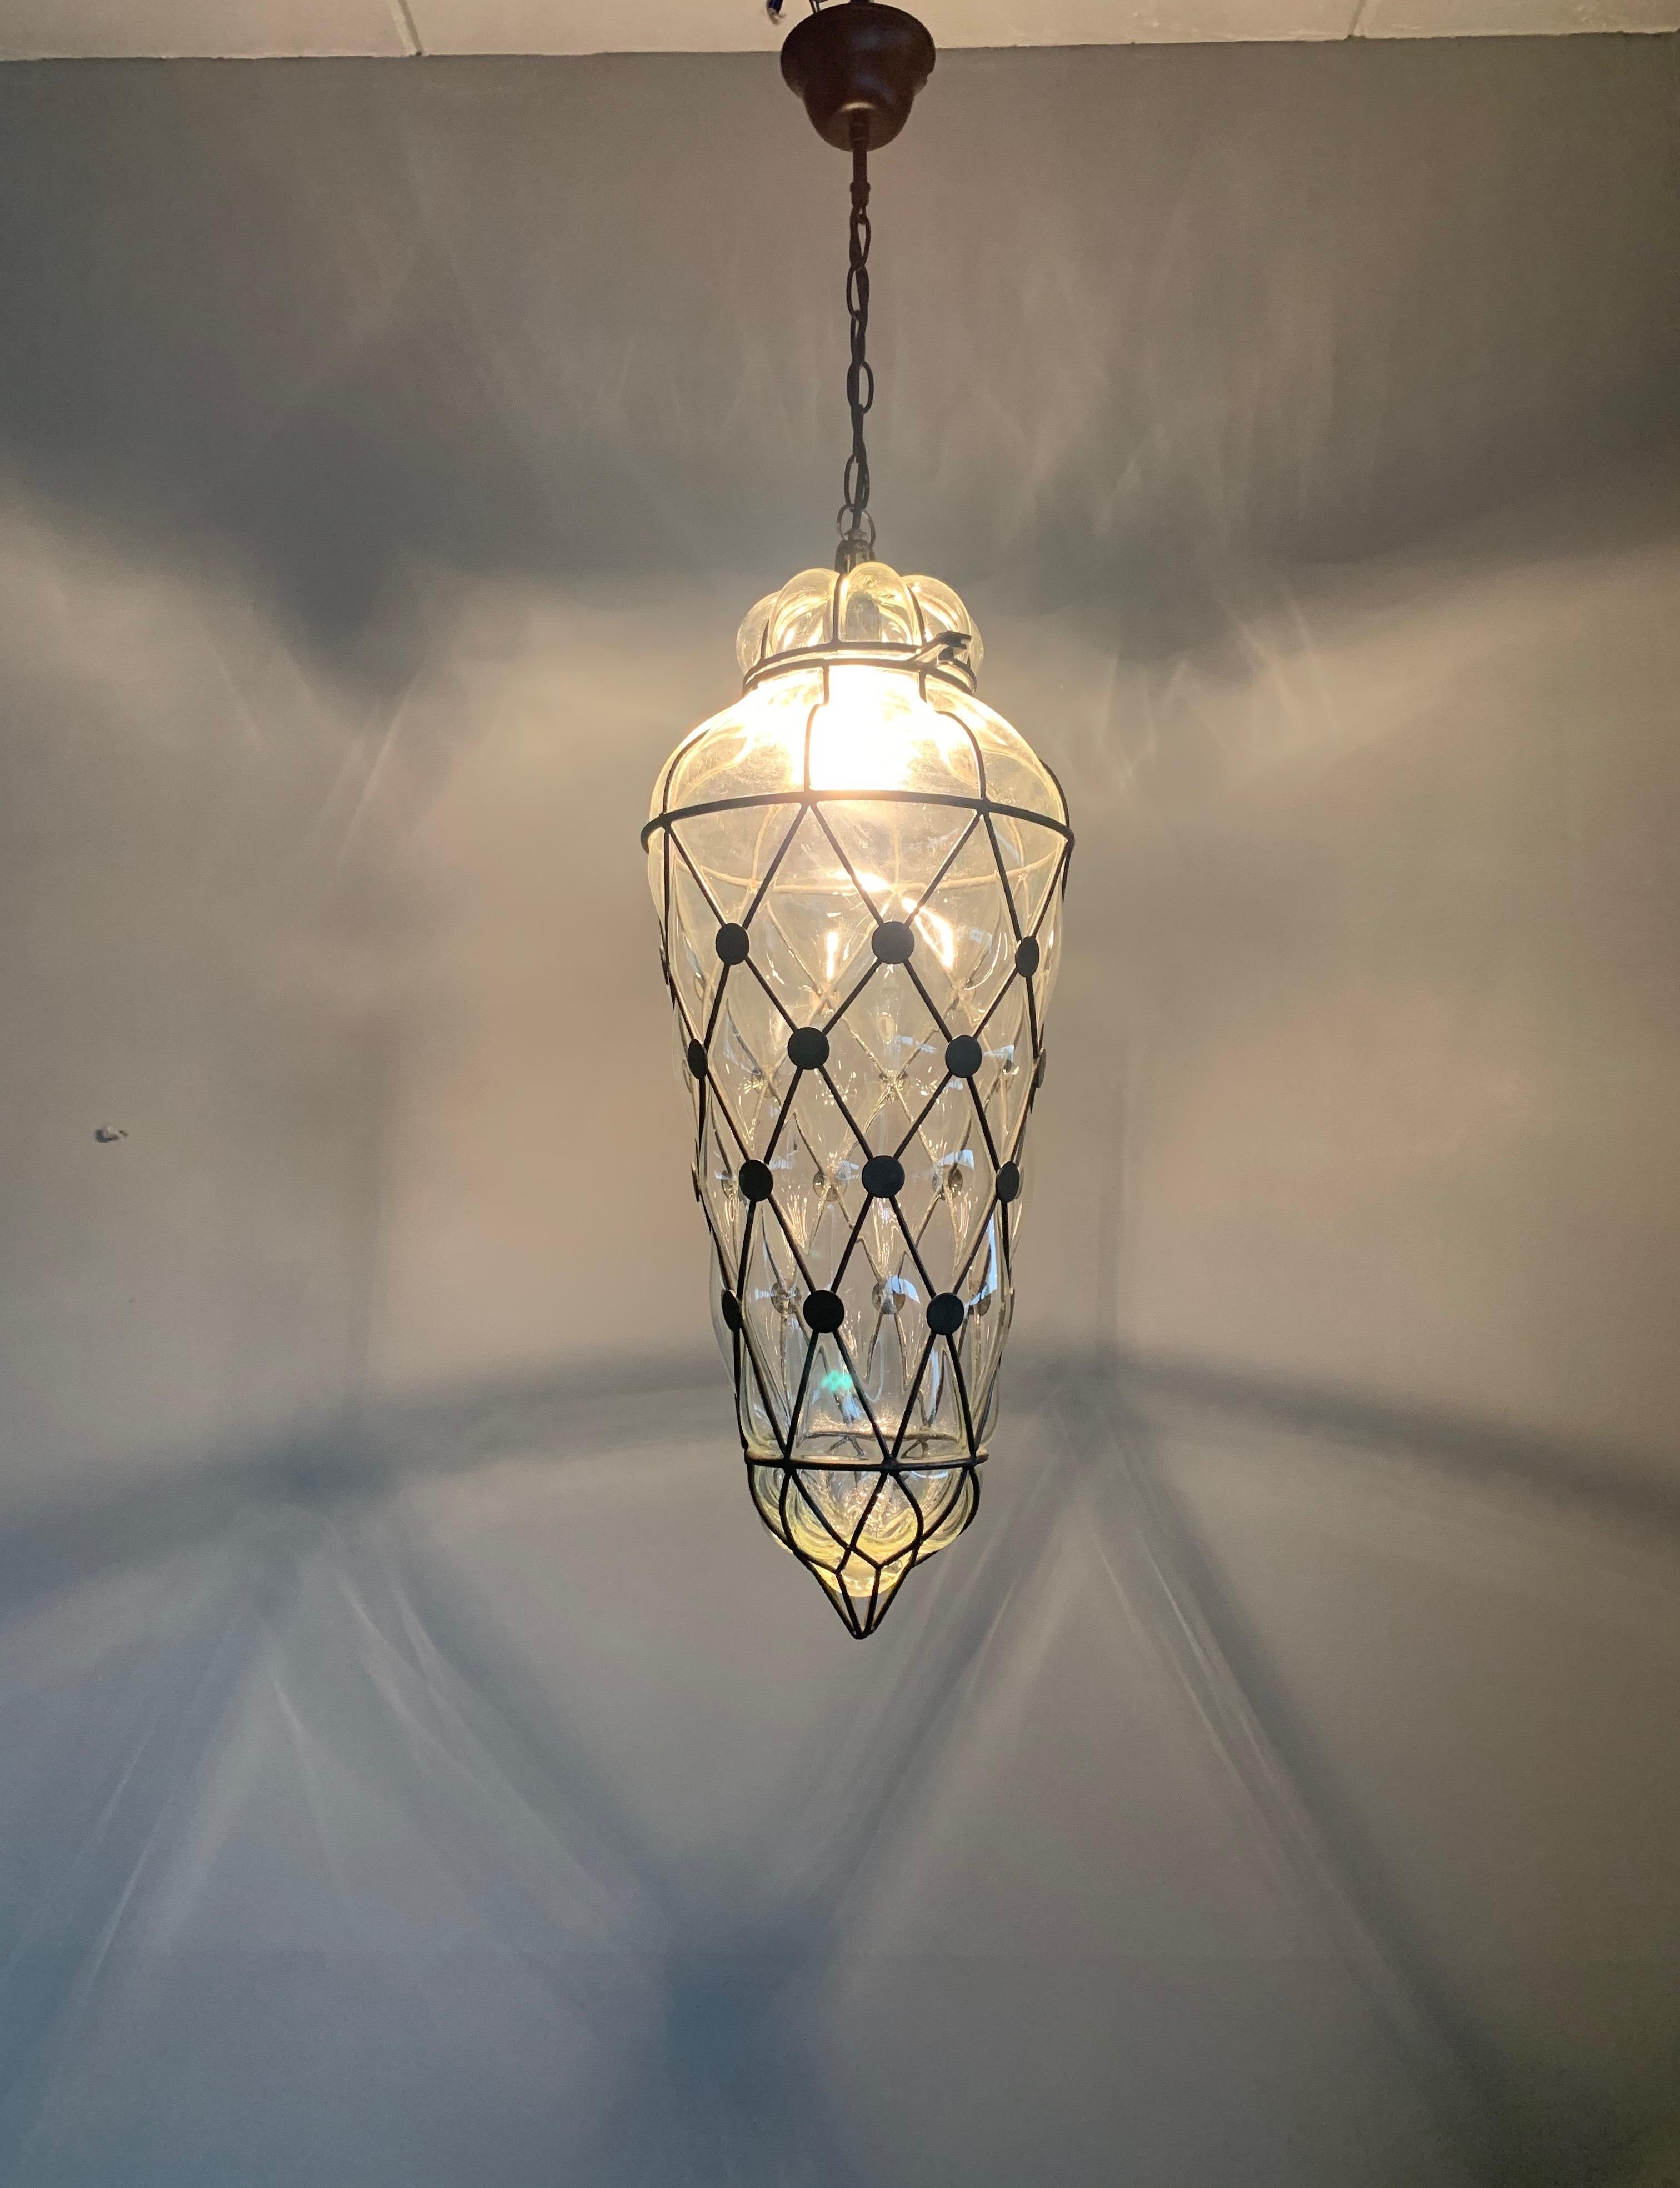 Beautiful and large size fixture with mouthblown glass in a handcrafted metal frame. 

If you are looking for a rare and stylish fixture to grace your home then this handcrafted clear glass specimen could be perfect. We were, again, very happy to